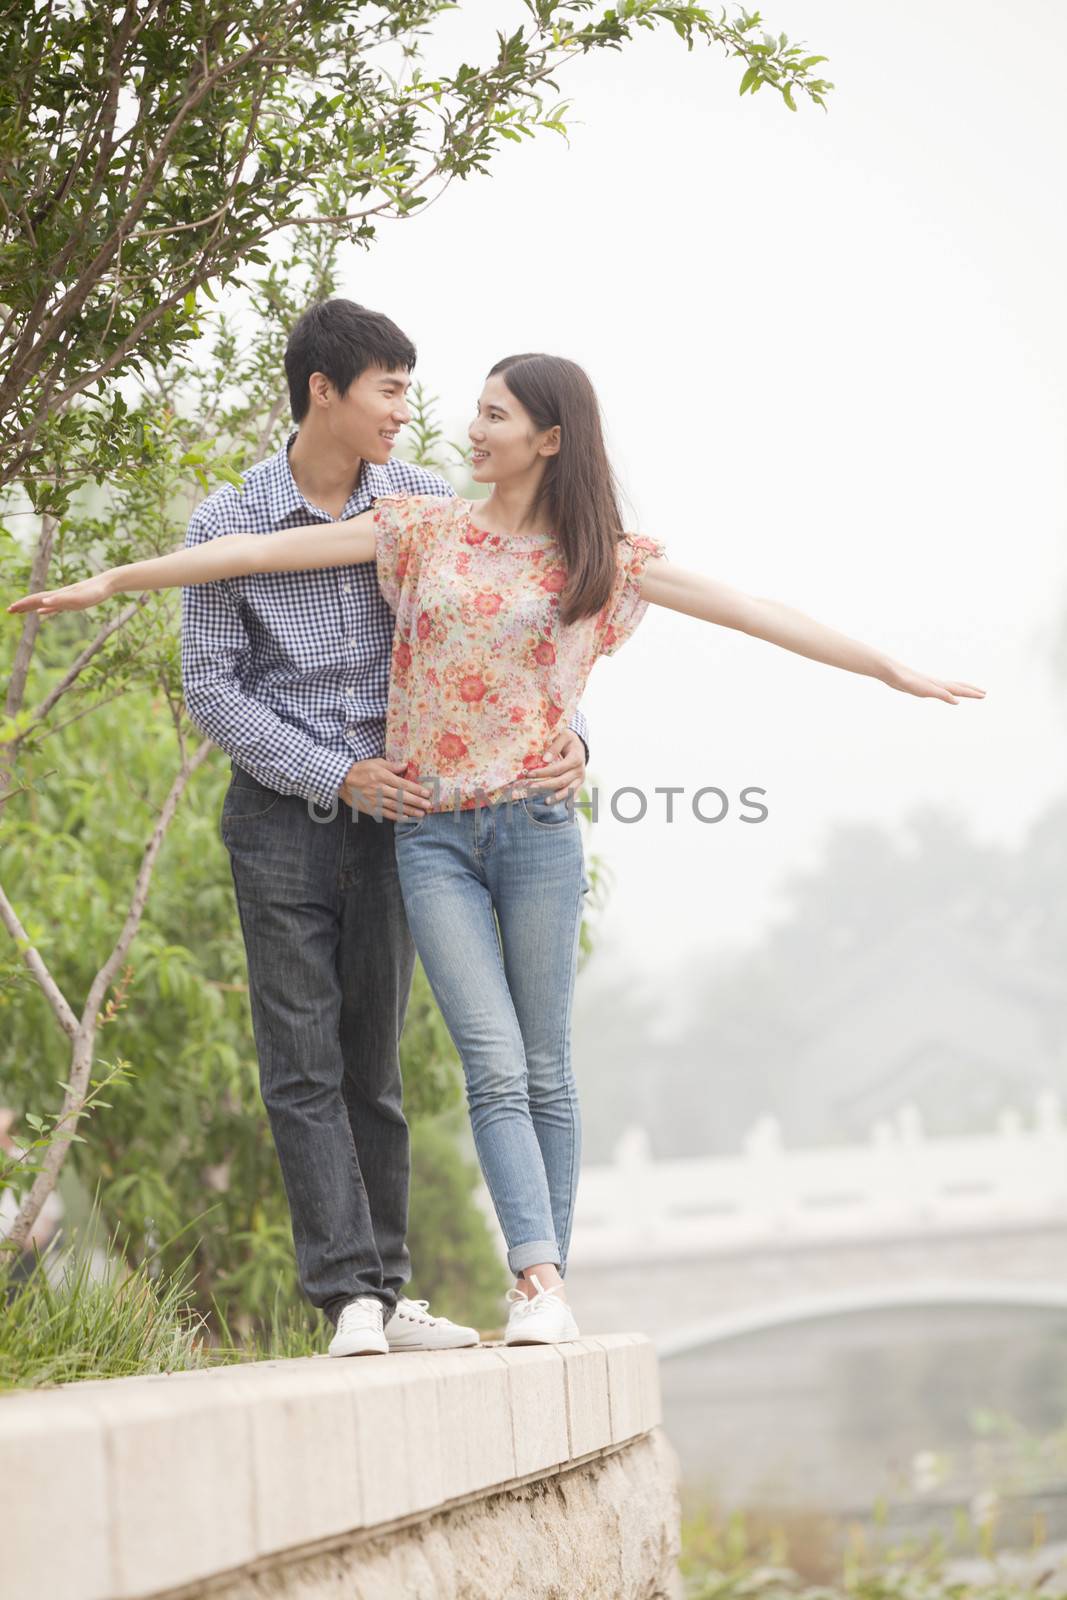 Boyfriend and Girlfriend by a Canal by XiXinXing